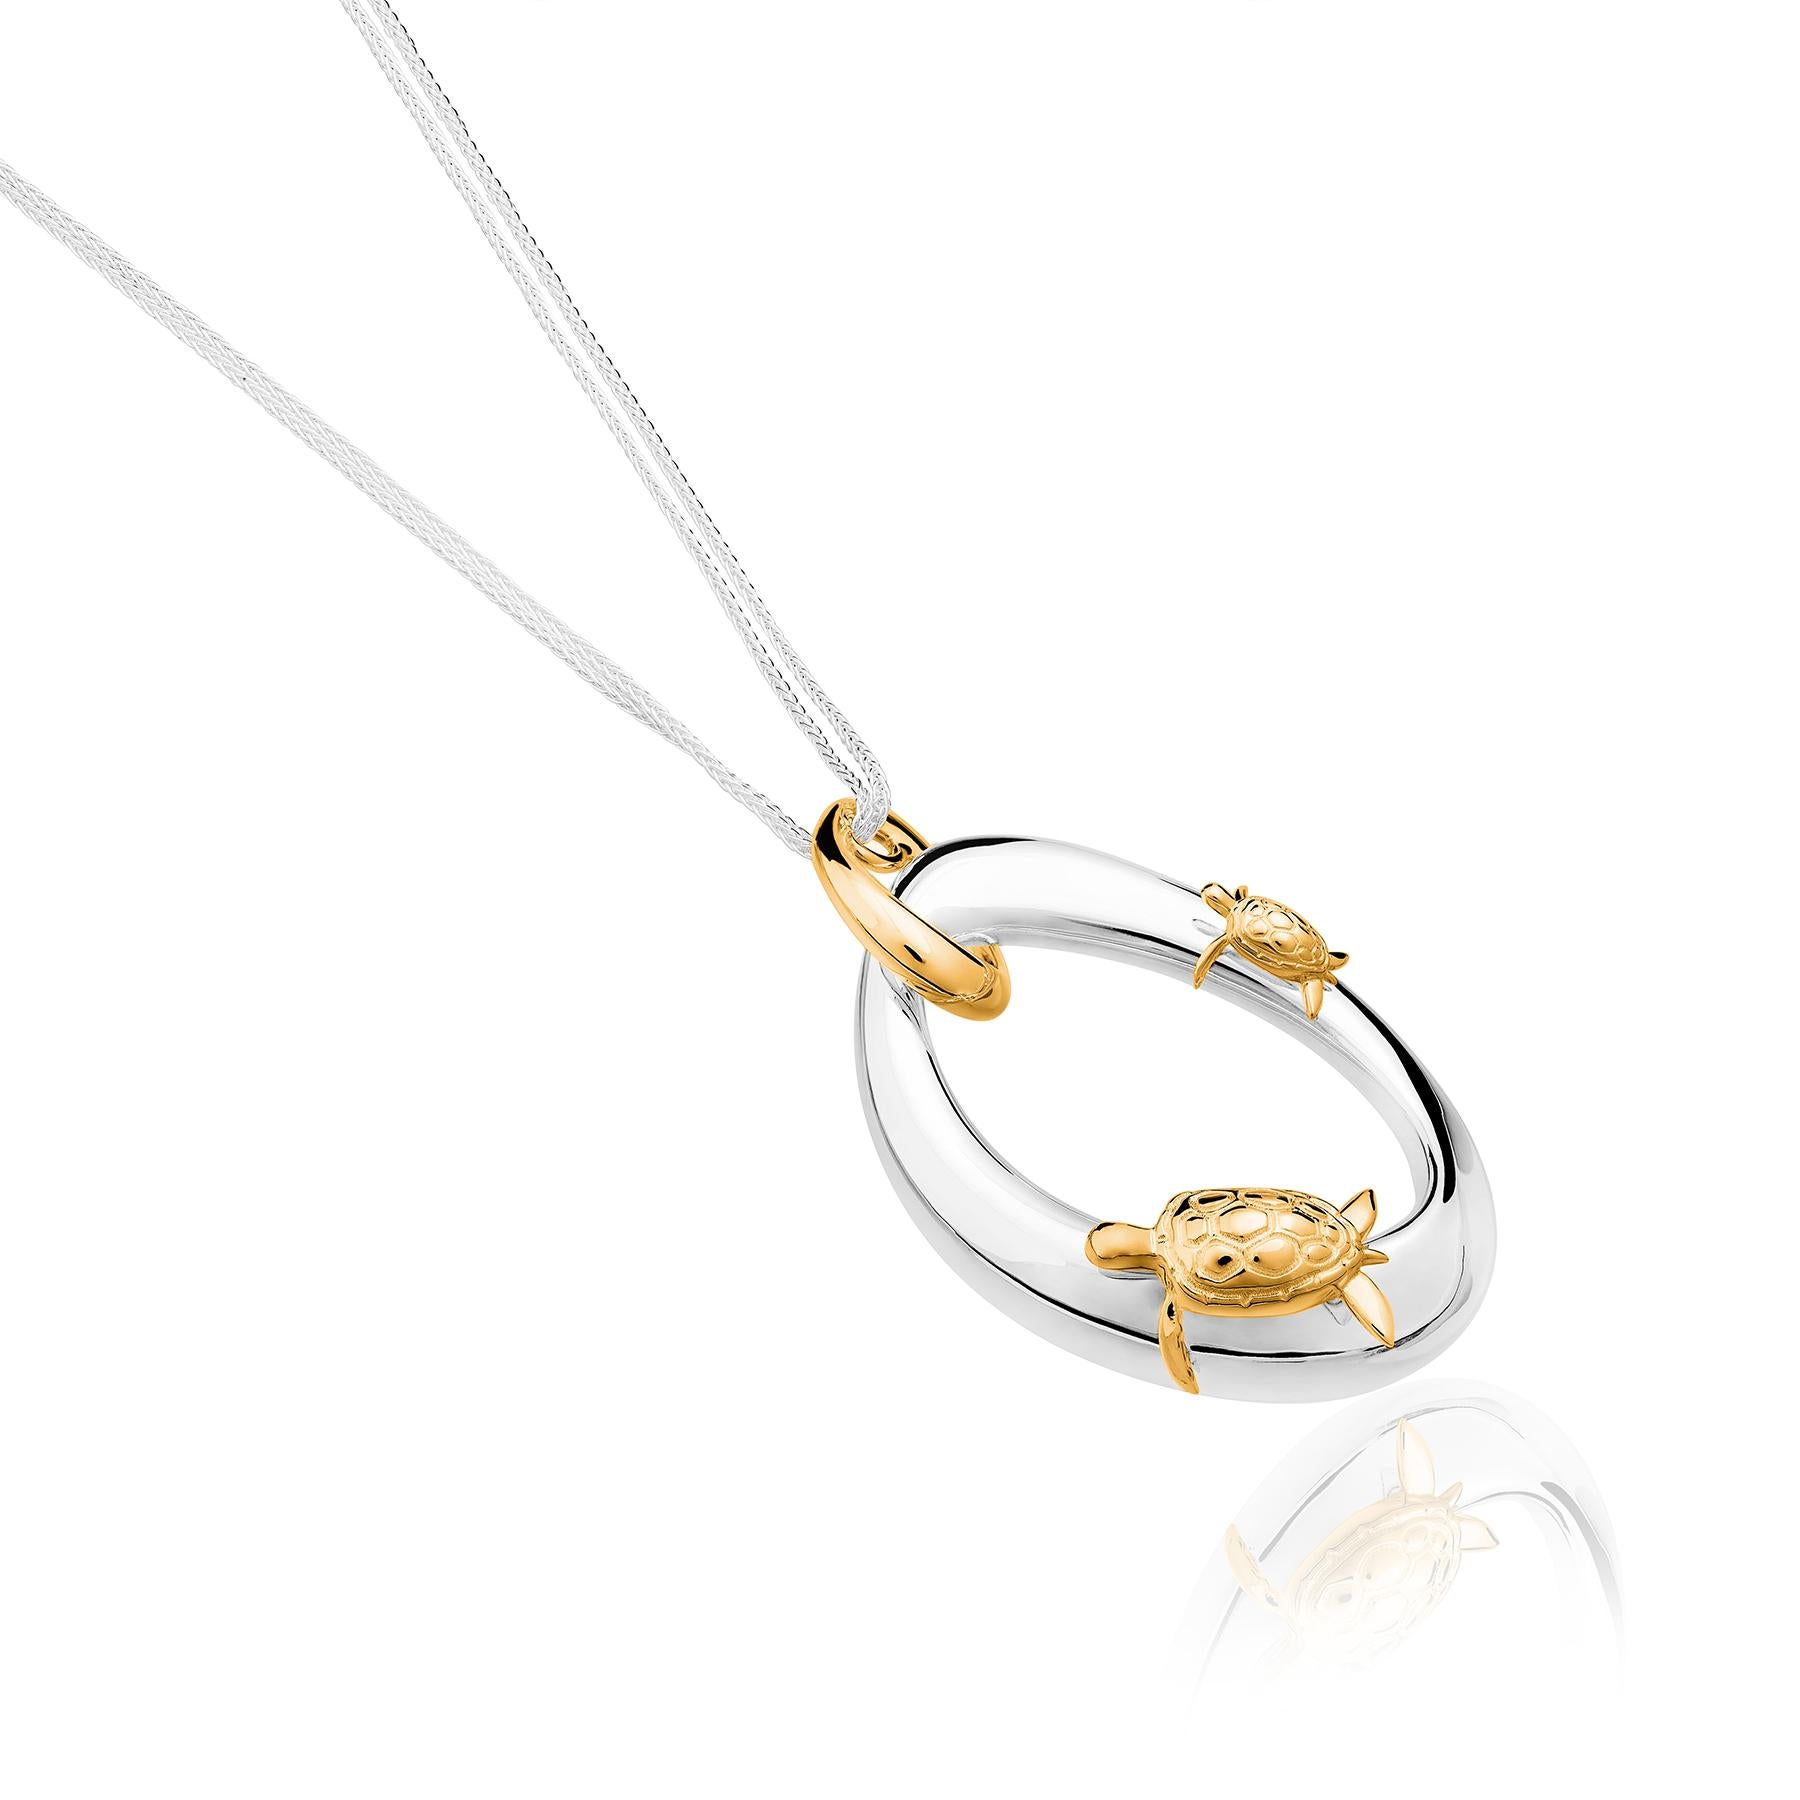 The Turtle Vermeil Pendant from the Animales Collection by TANE is made in sterling silver. Suspended from a chain of 31.4” there is an irregular link designed for the collection, inspired by nature. Two turtles finished in 23 karat yellow gold